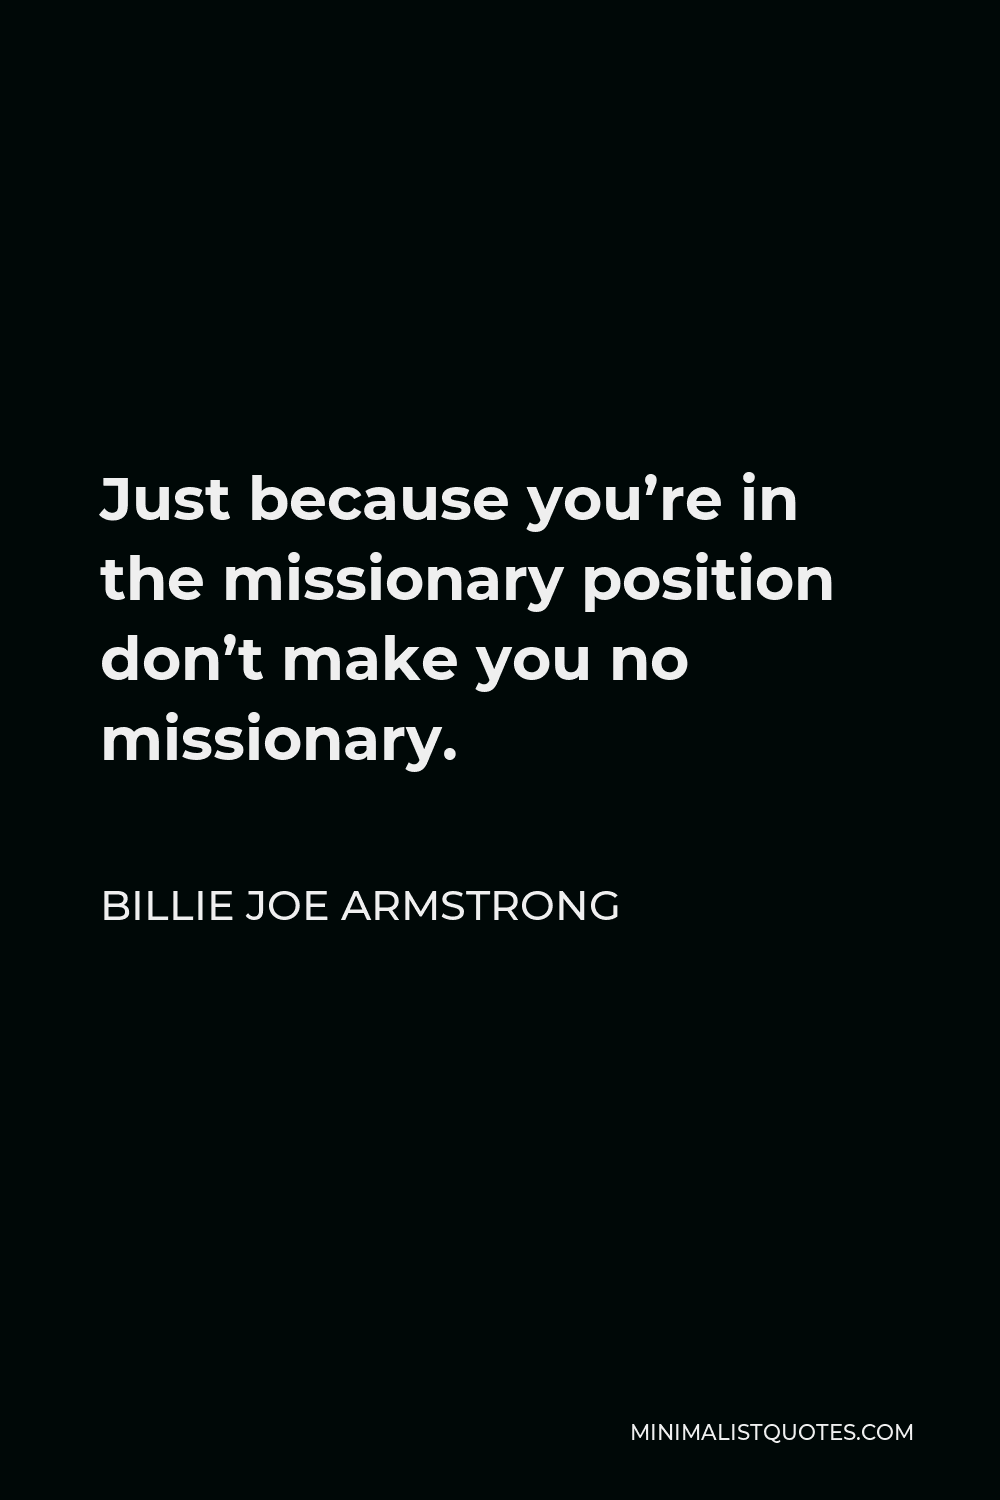 Billie Joe Armstrong Quote - Just because you’re in the missionary position don’t make you no missionary.